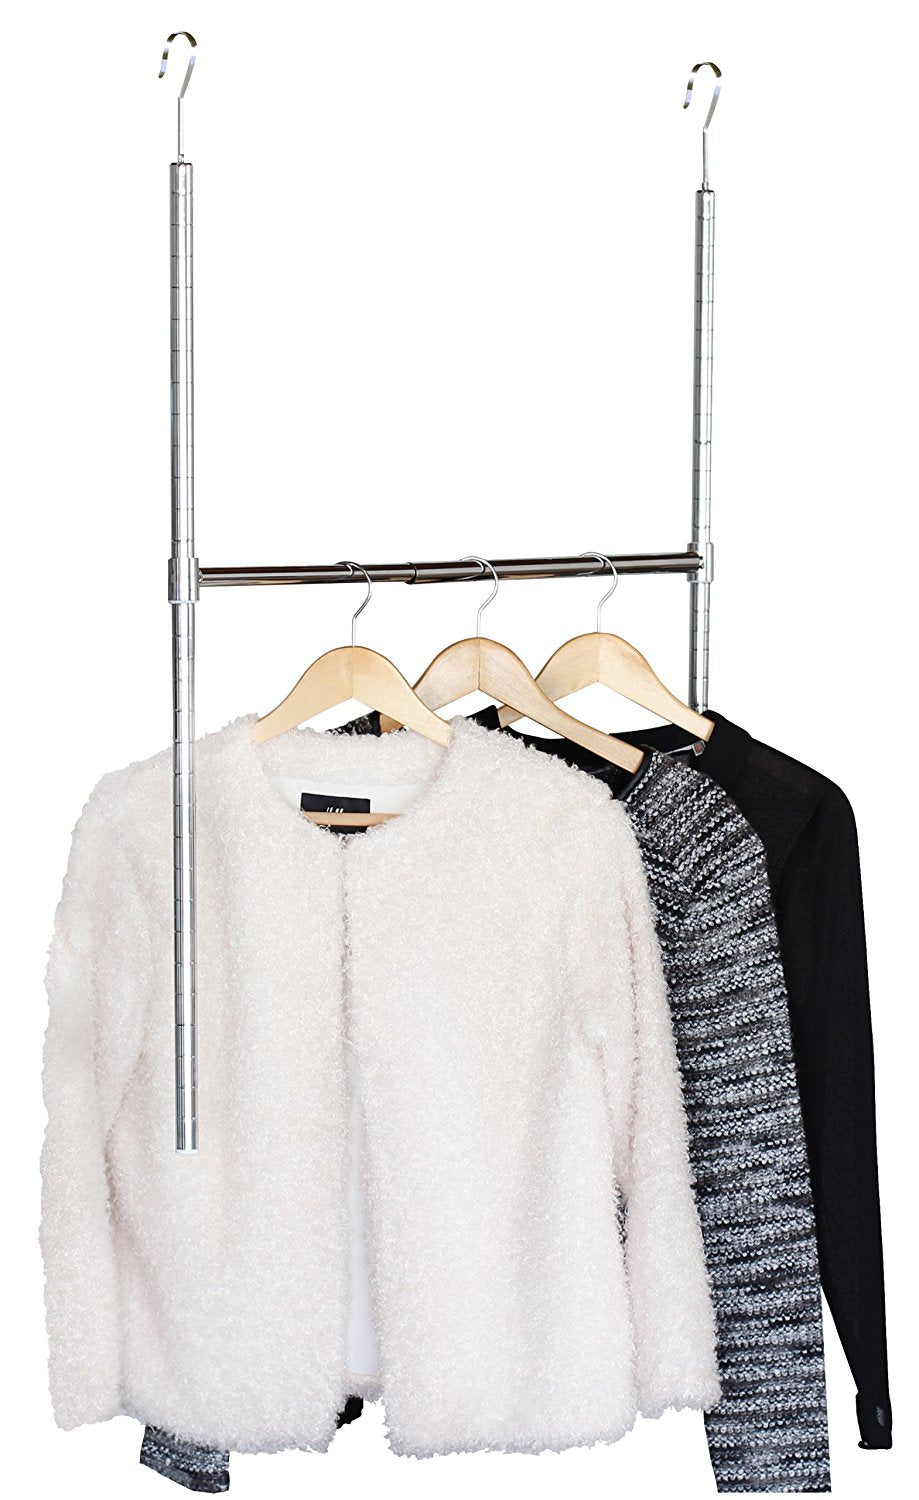 adjustable closet extender pictured with 3 sweaters hanging